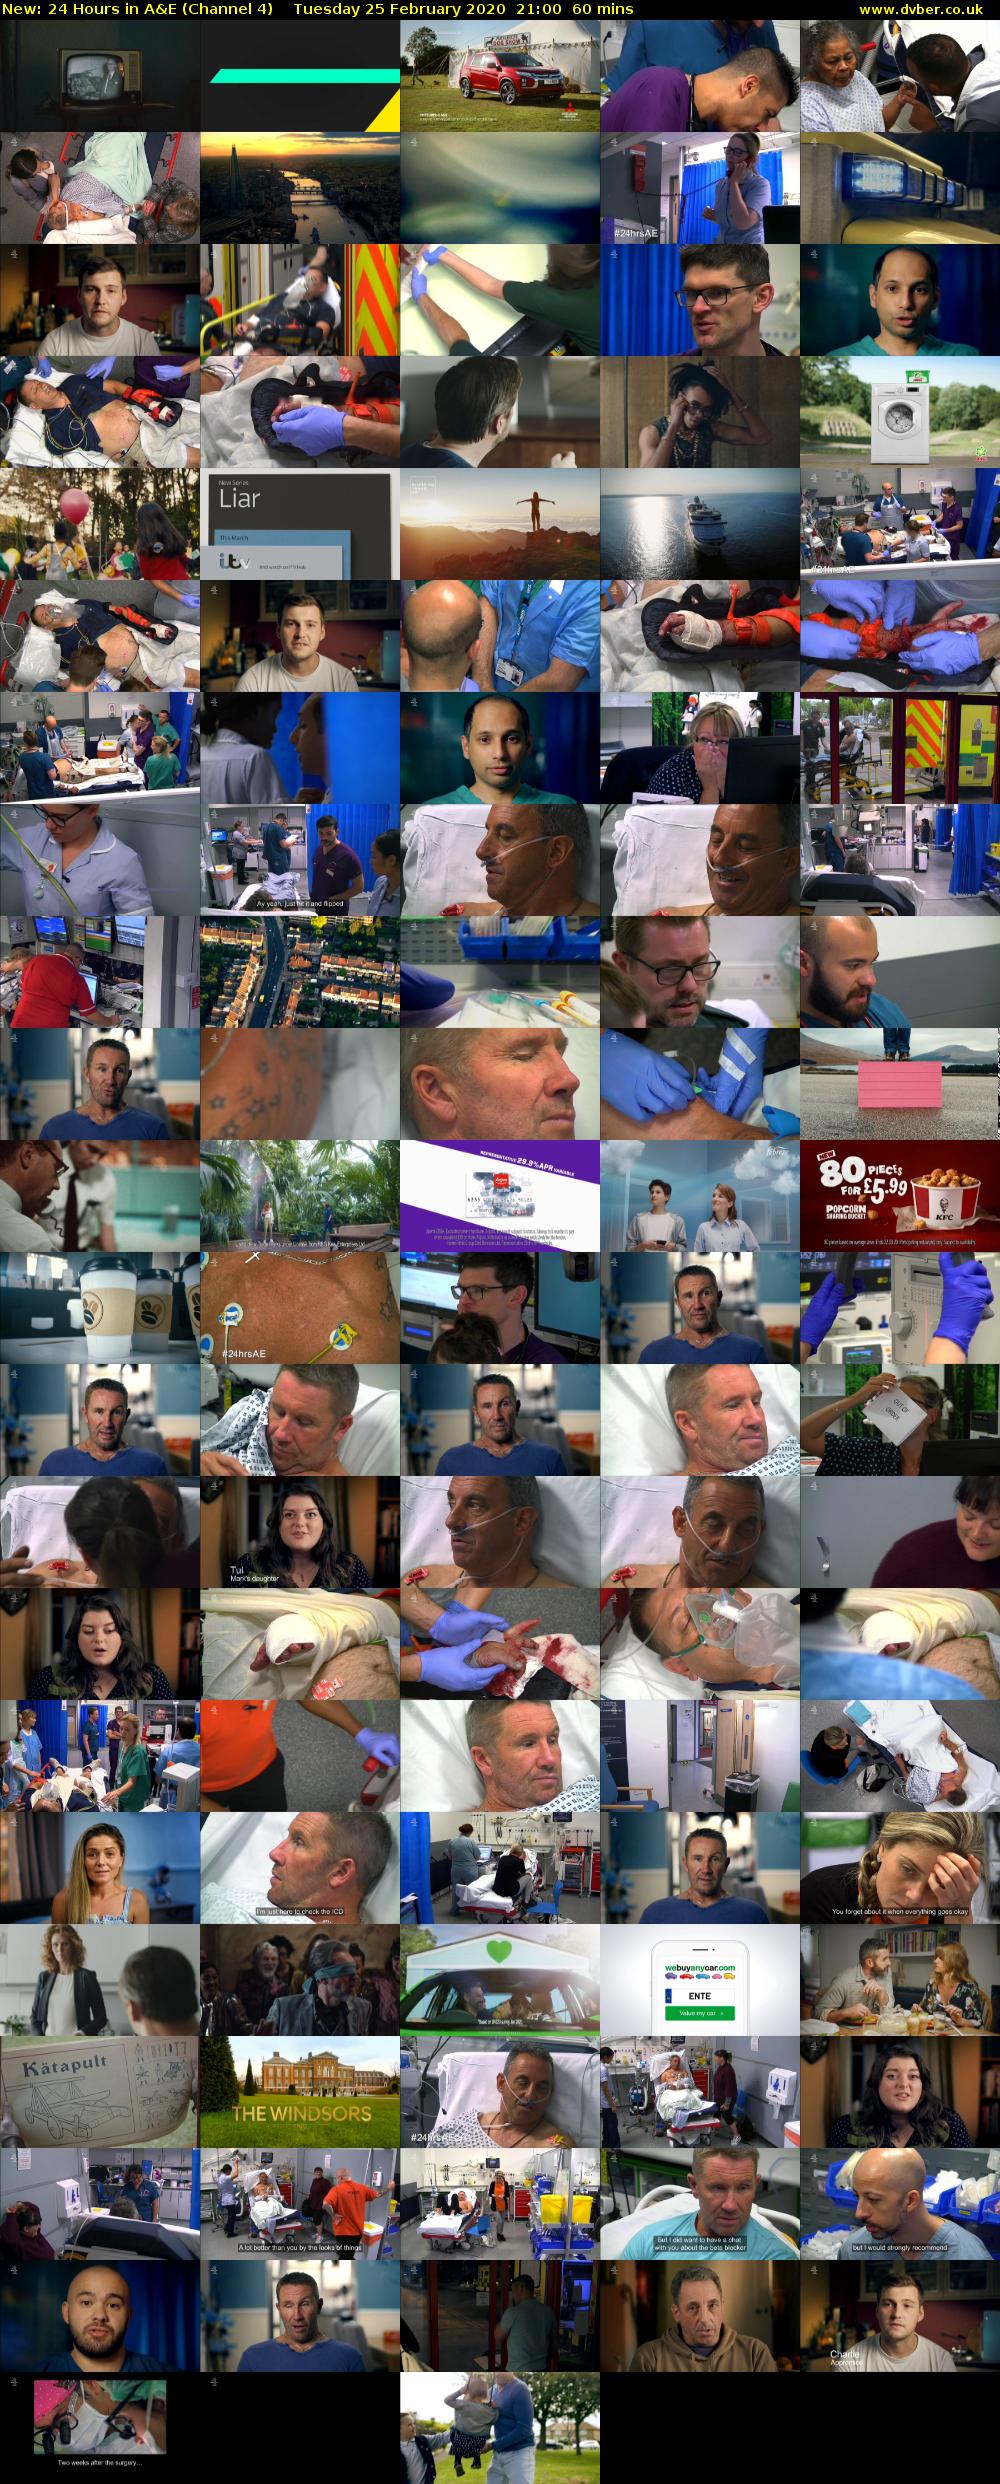 24 Hours in A&E (Channel 4) Tuesday 25 February 2020 21:00 - 22:00